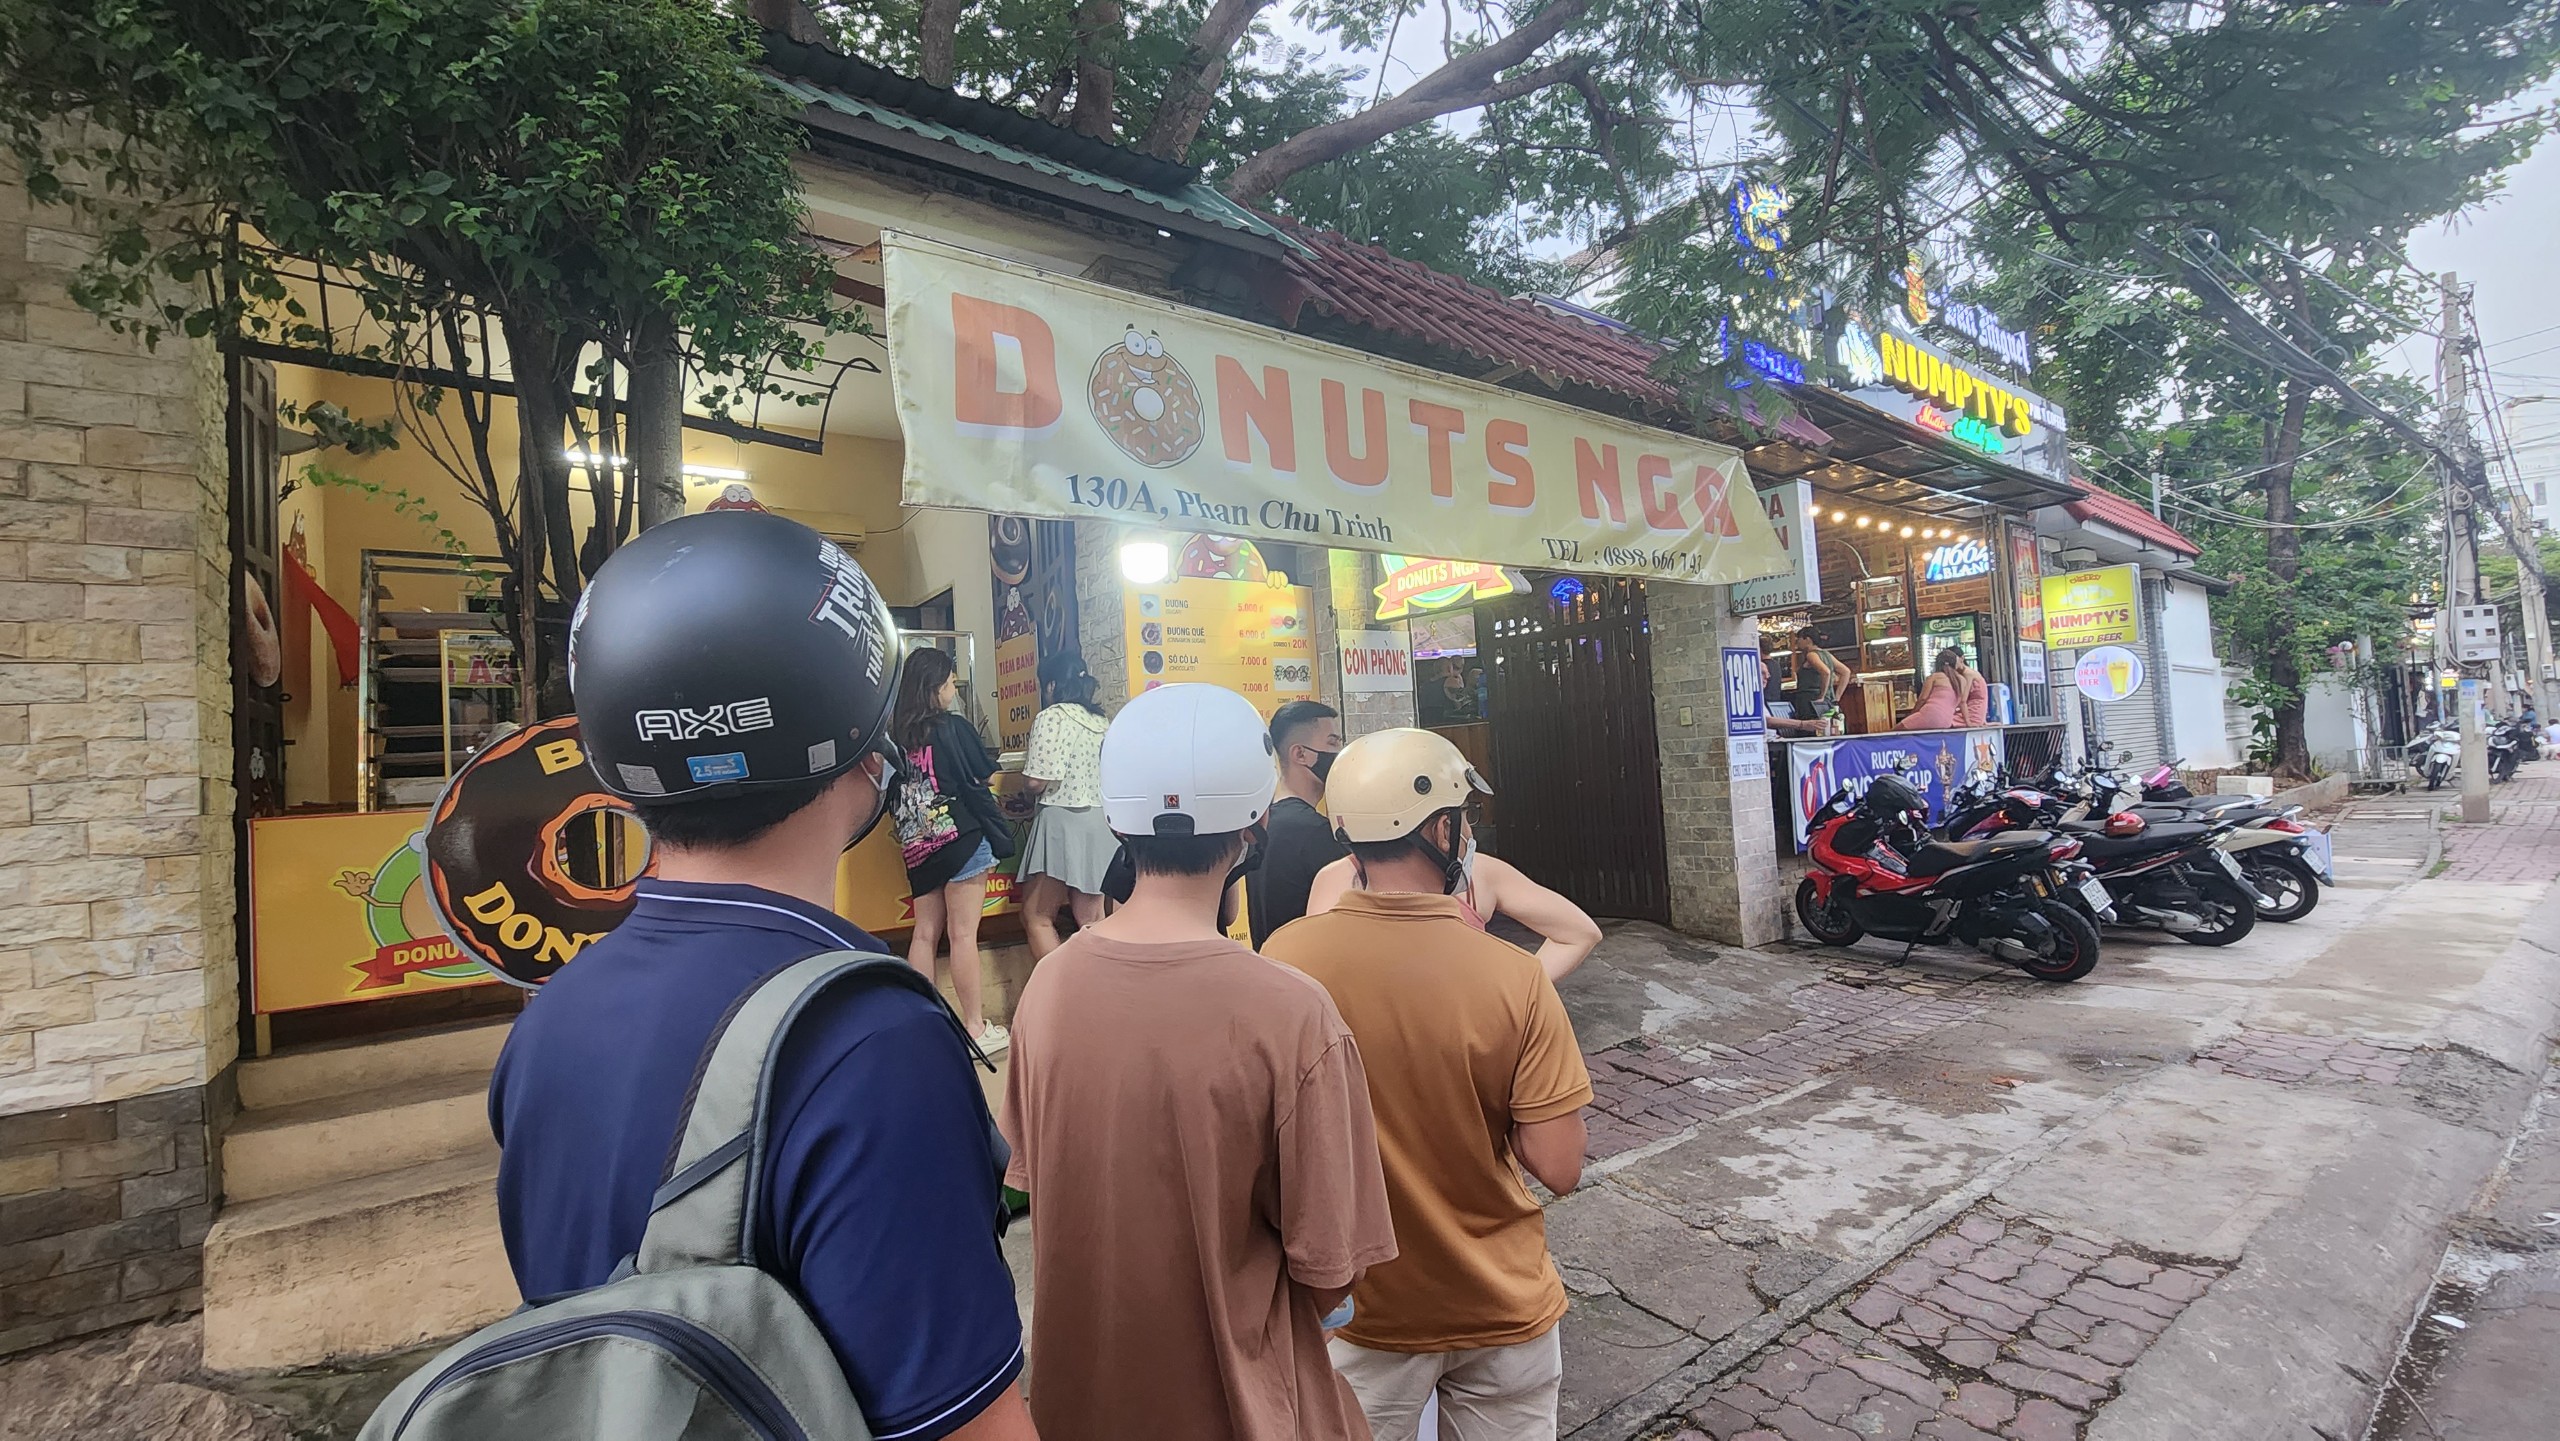 Russian couple’s donut shop a magnet for locals and tourists in southern Vietnam beach city